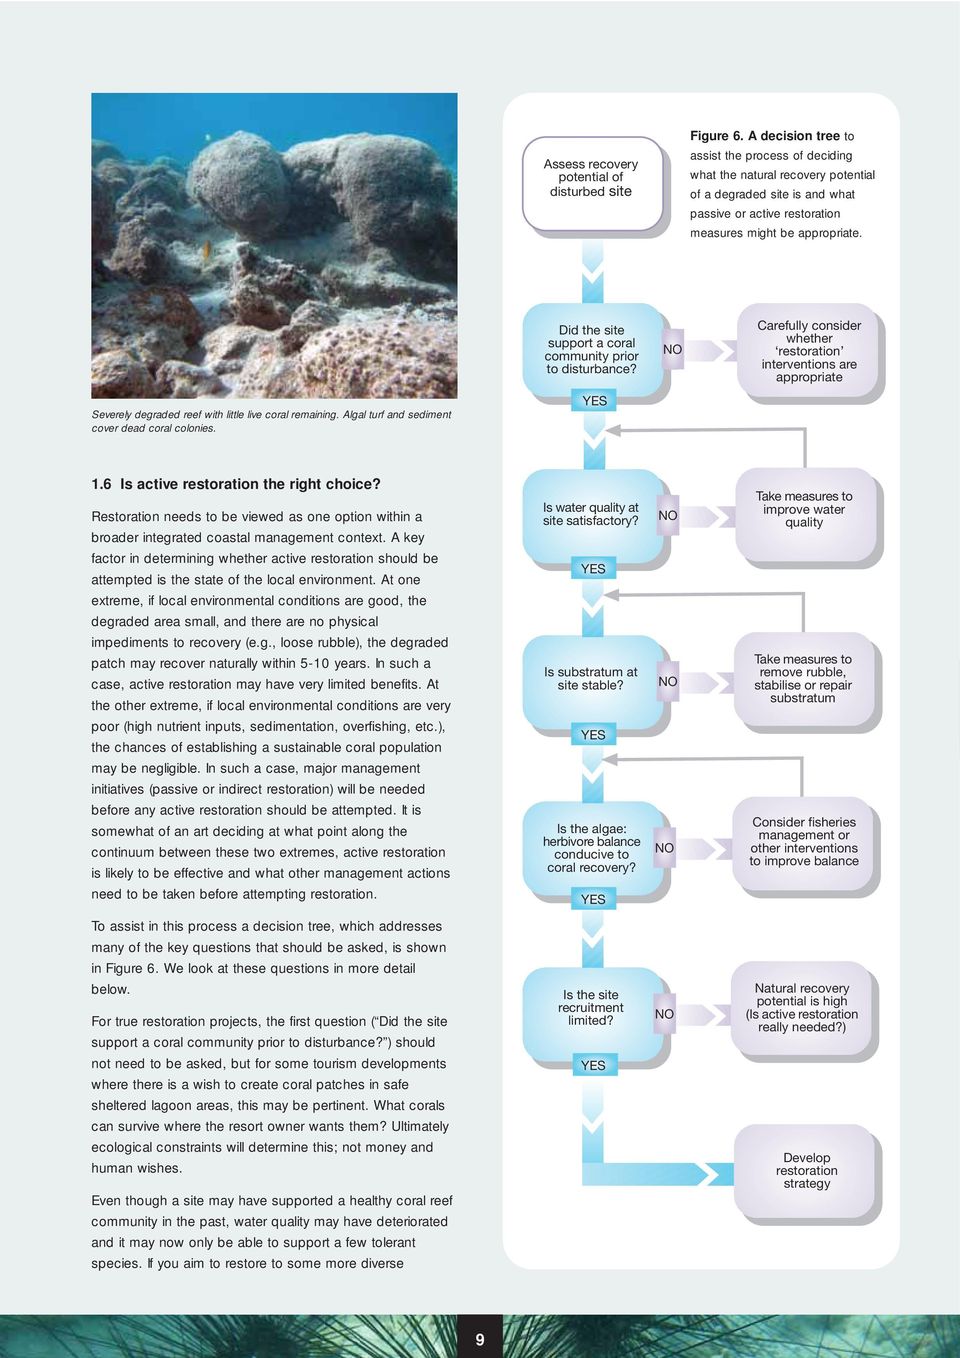 Did the site support a coral community prior to disturbance? NO Carefully consider whether restoration interventions are appropriate Severely degraded reef with little live coral remaining.